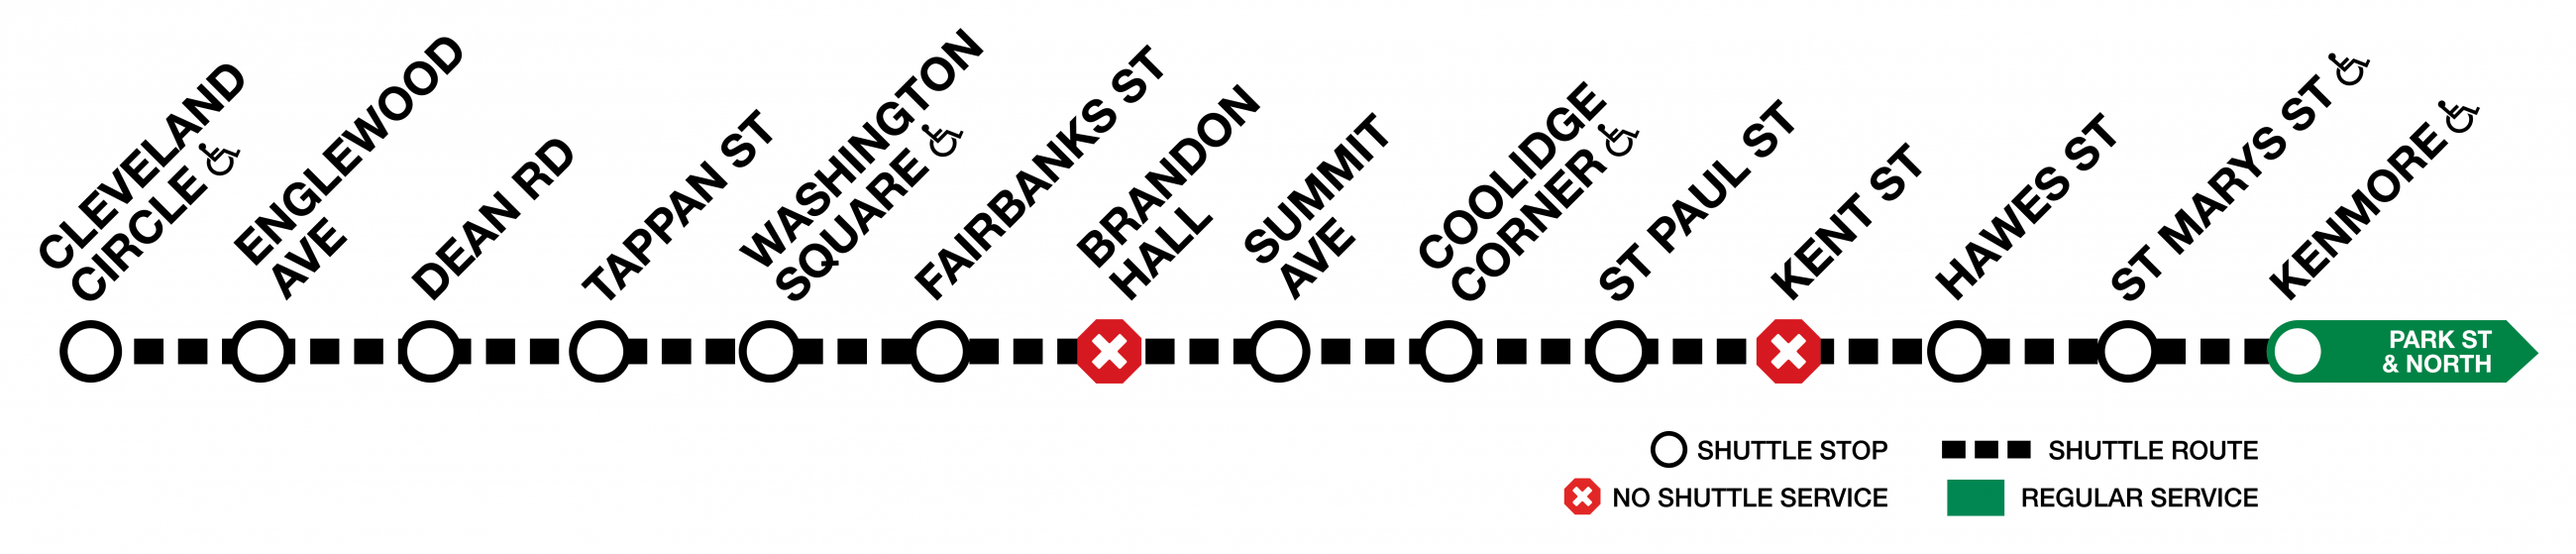 Graphic showing the Green Line, with bus shuttles running between Cleveland Cirlce and Kenomre, with no shuttle service at Brandon Hall and Kent Street.